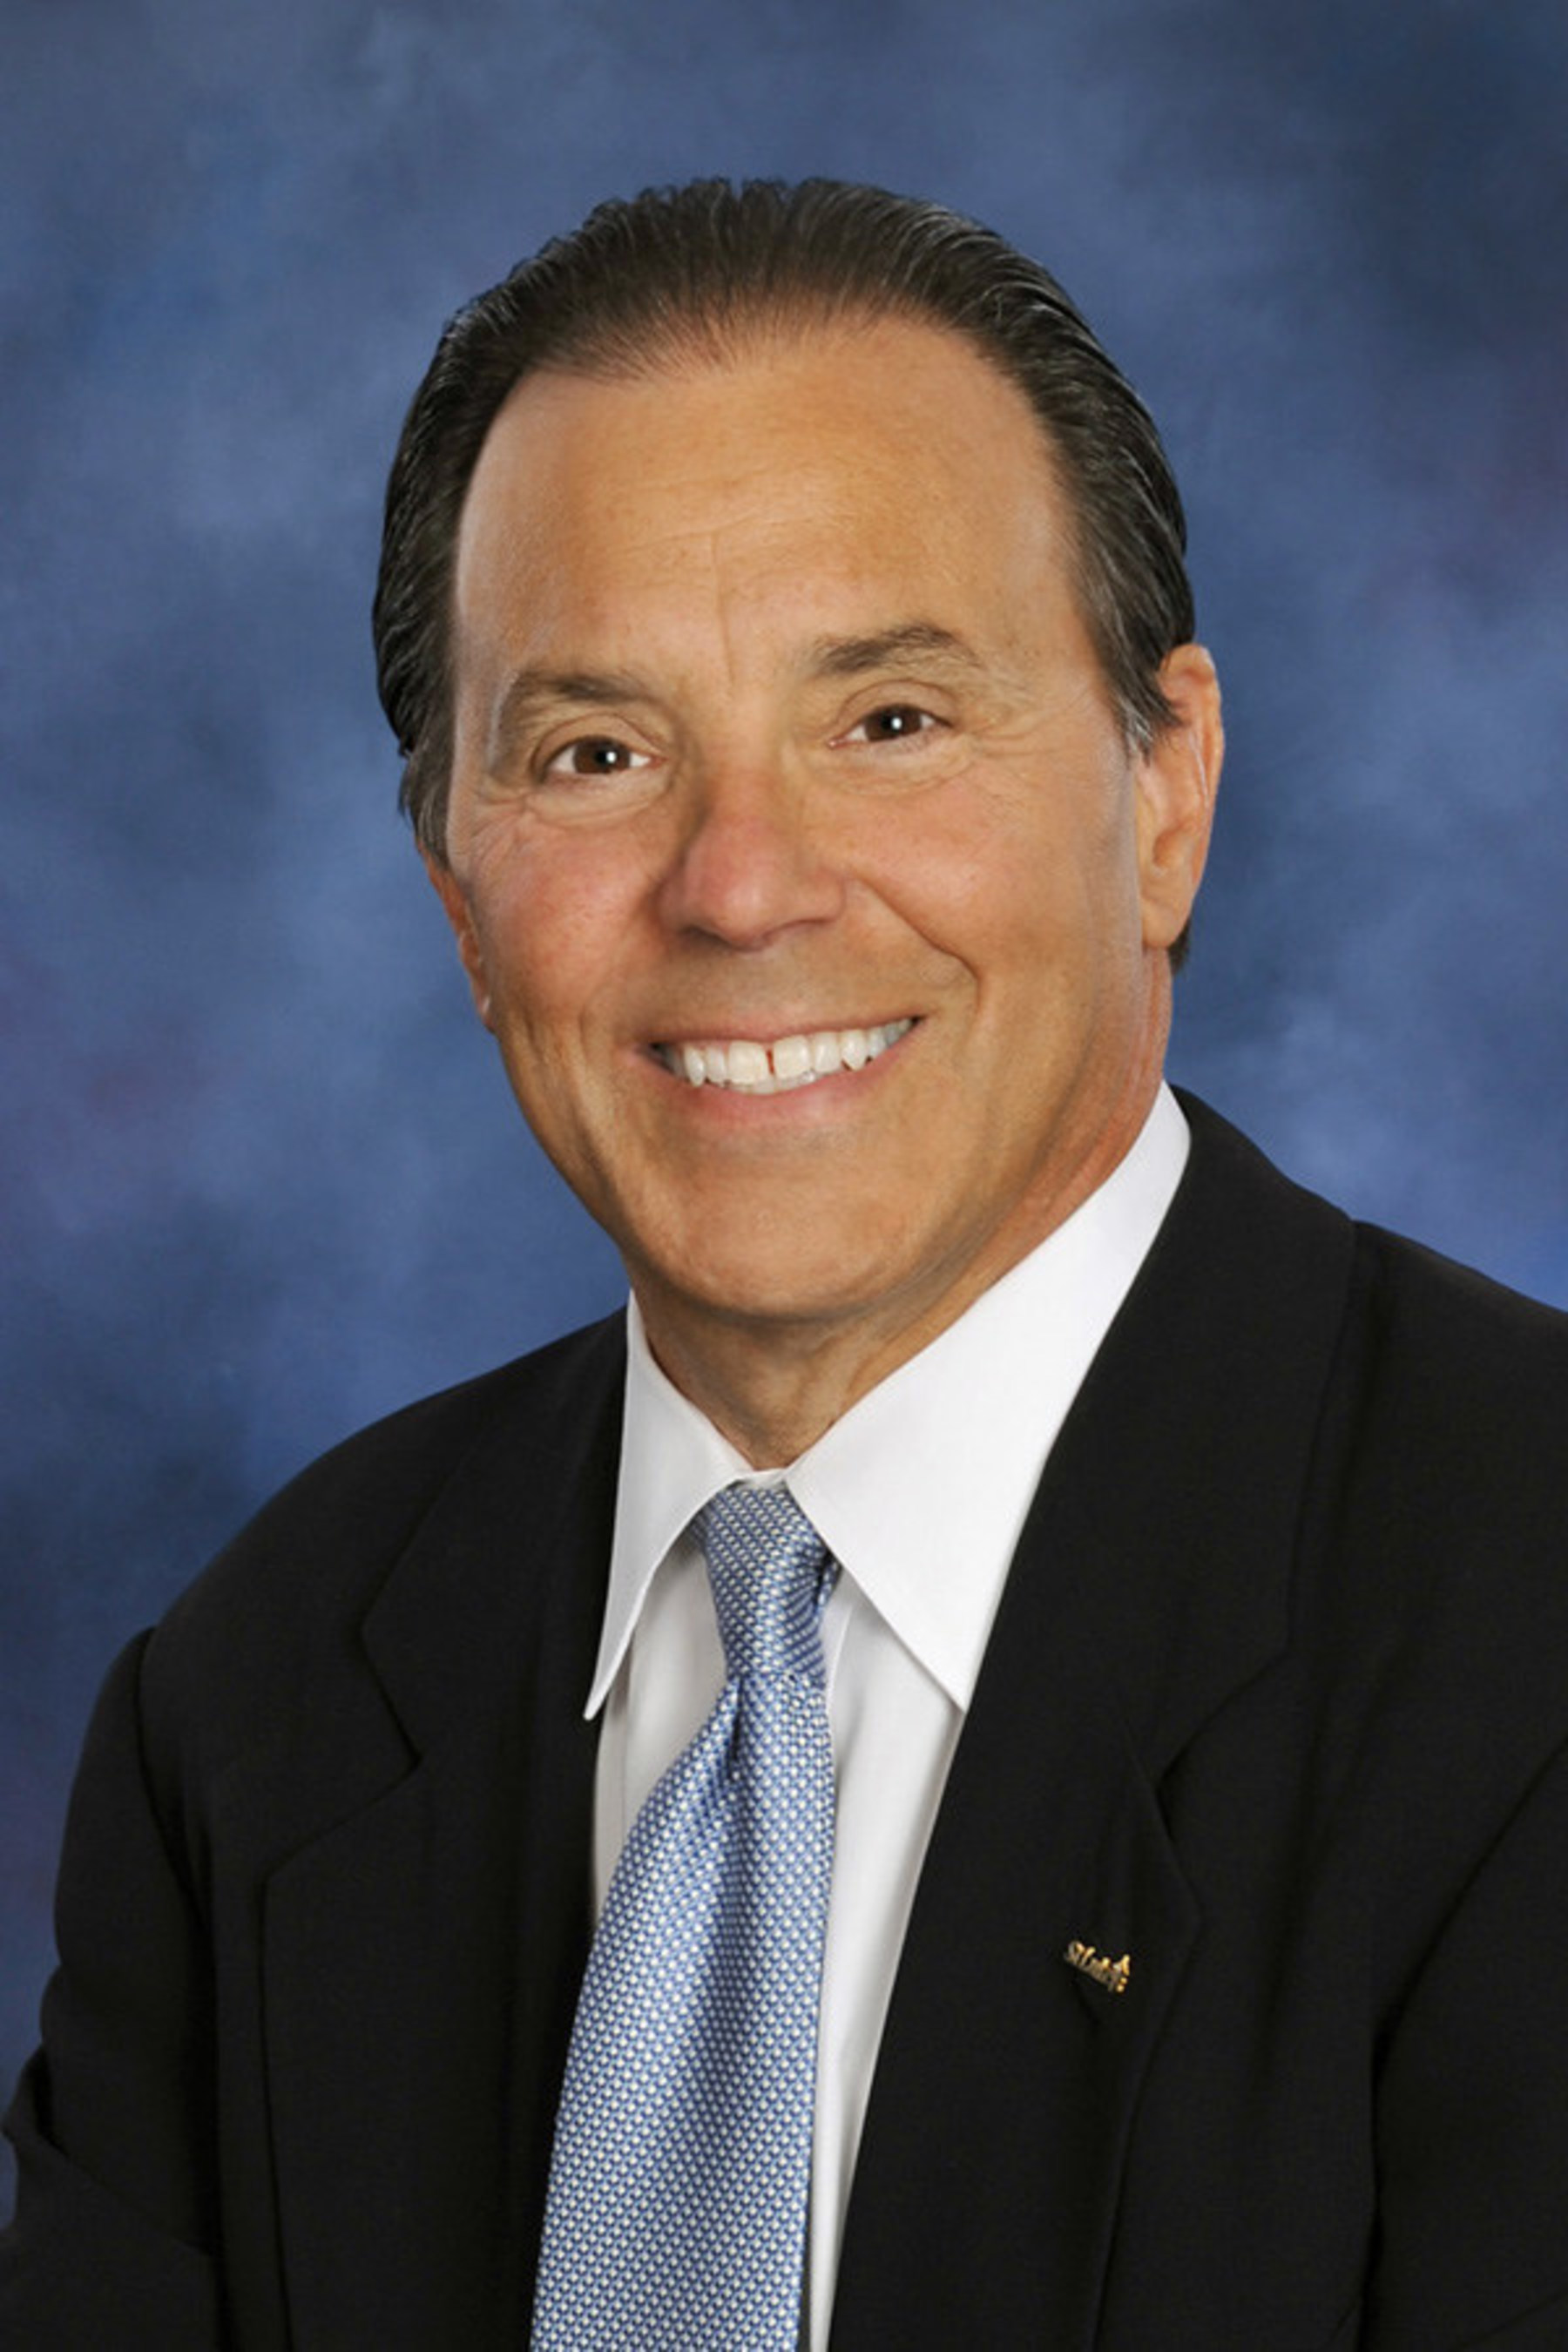 Richard A. Anderson, President and CEO of St. Luke's University Health Network